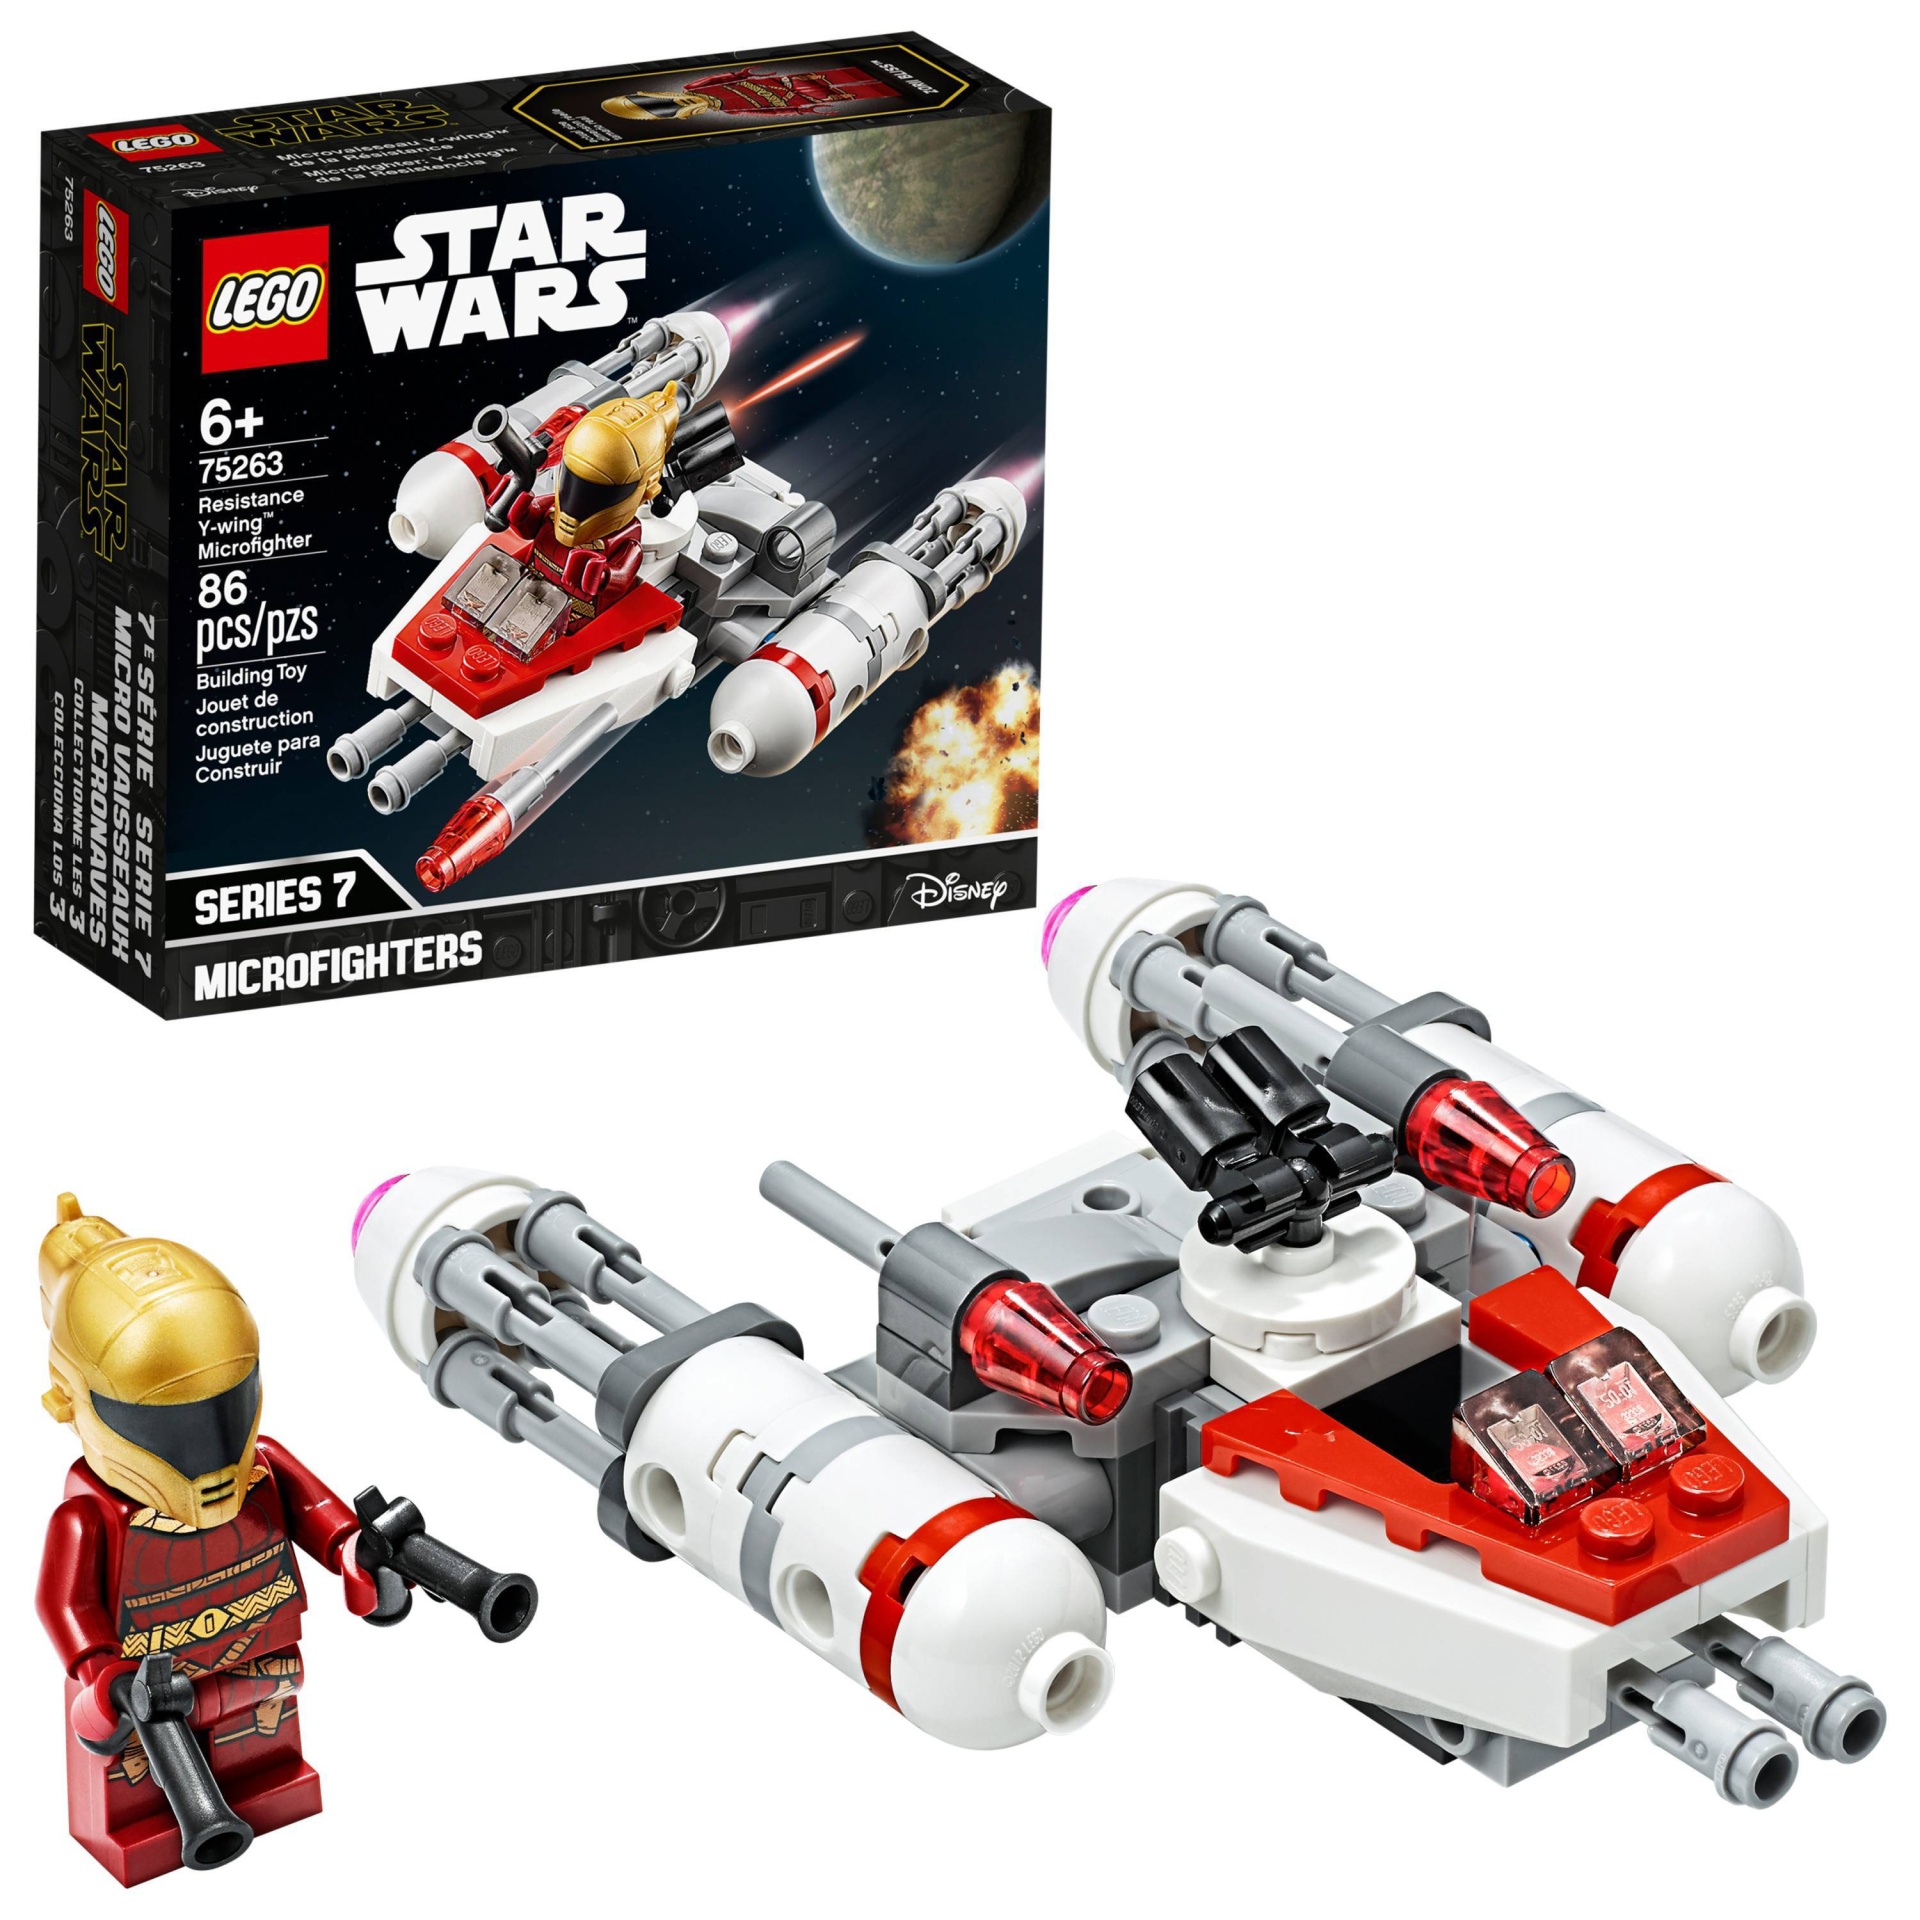 slide 1 of 7, LEGO Star Wars Resistance Y-wing Microfighter Cool Toy Building Kit 75263, 1 ct